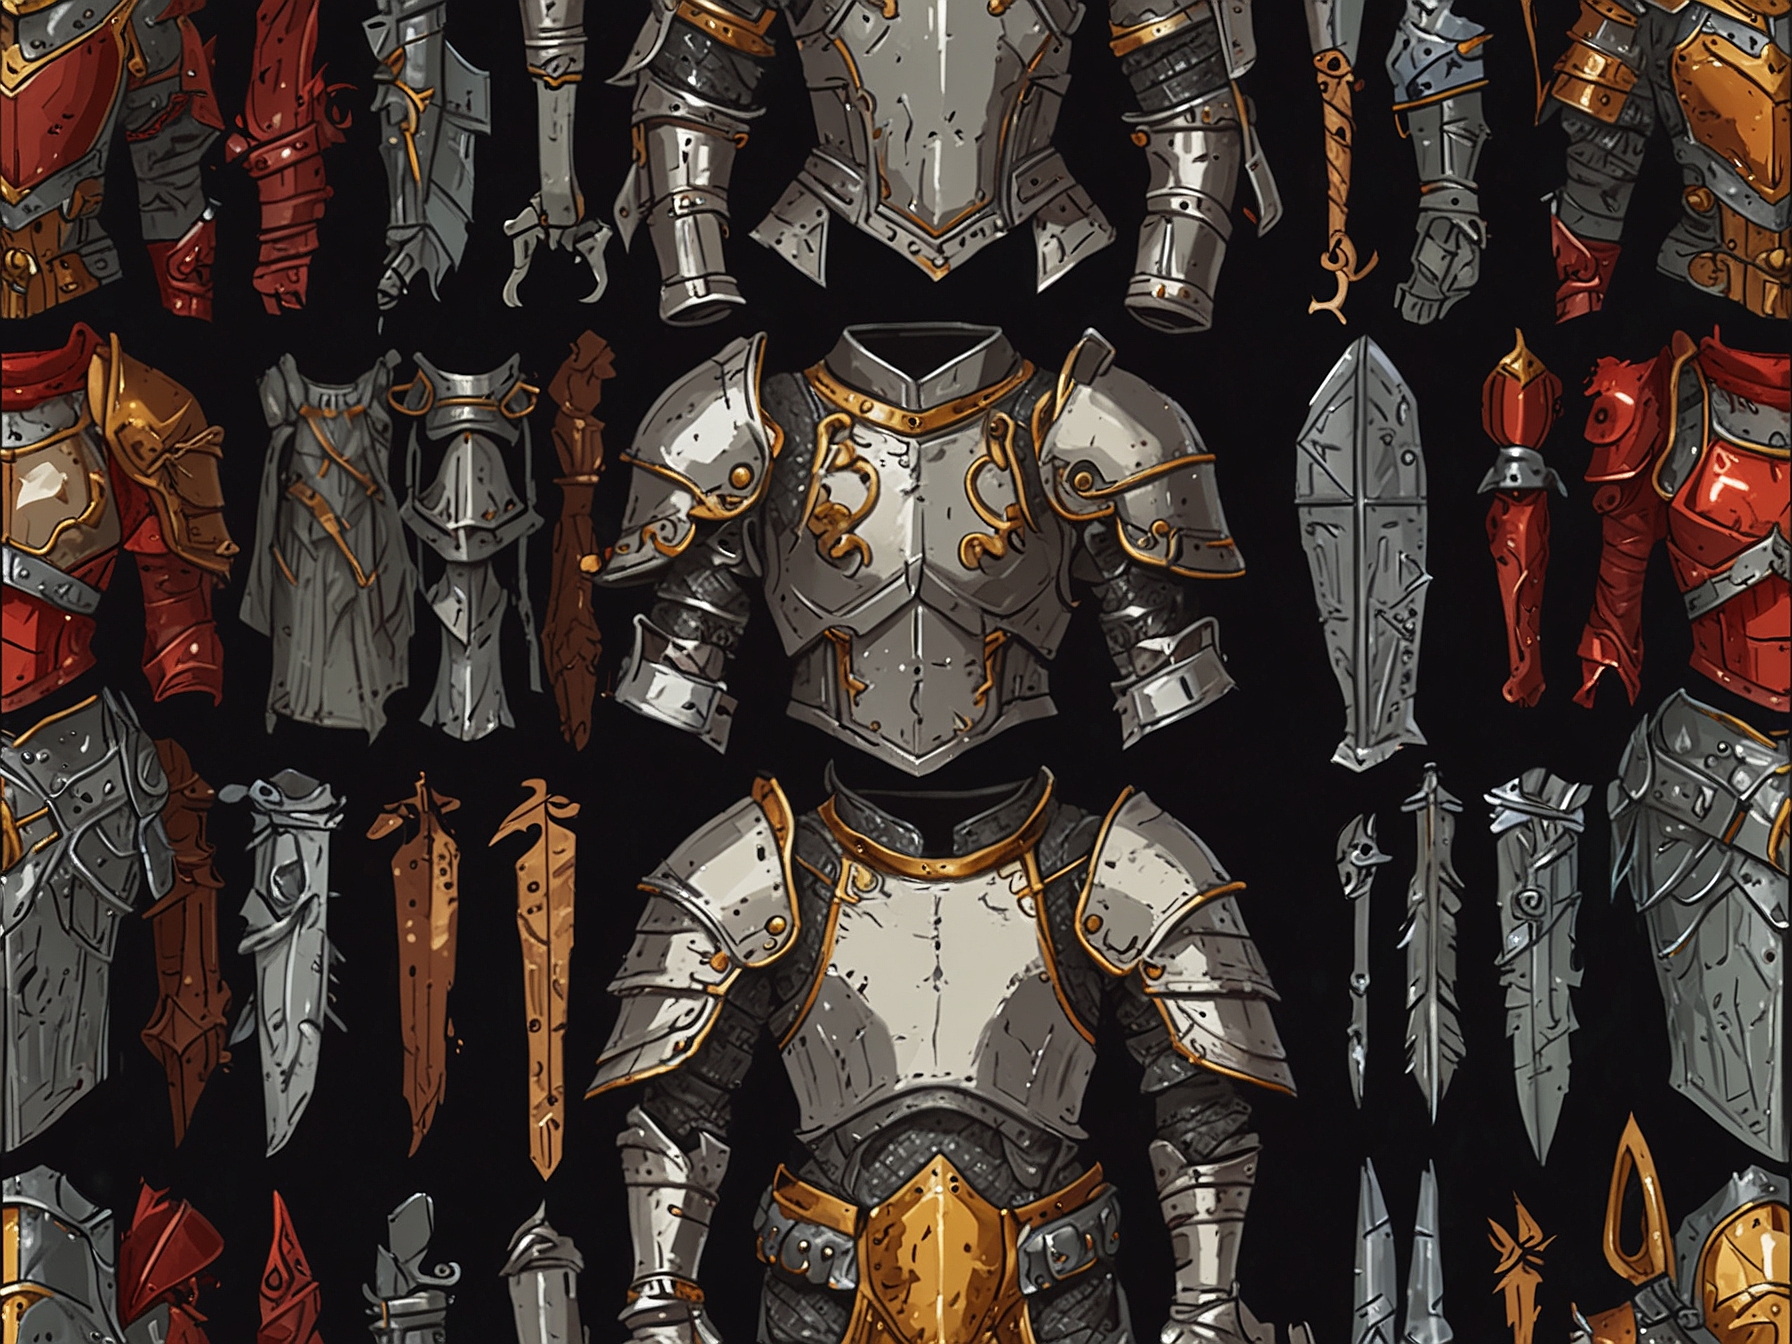 A variety of armor sets made of different cloth materials are displayed, showcasing how each offers unique advantages in terms of resistance, agility, and magic abilities.